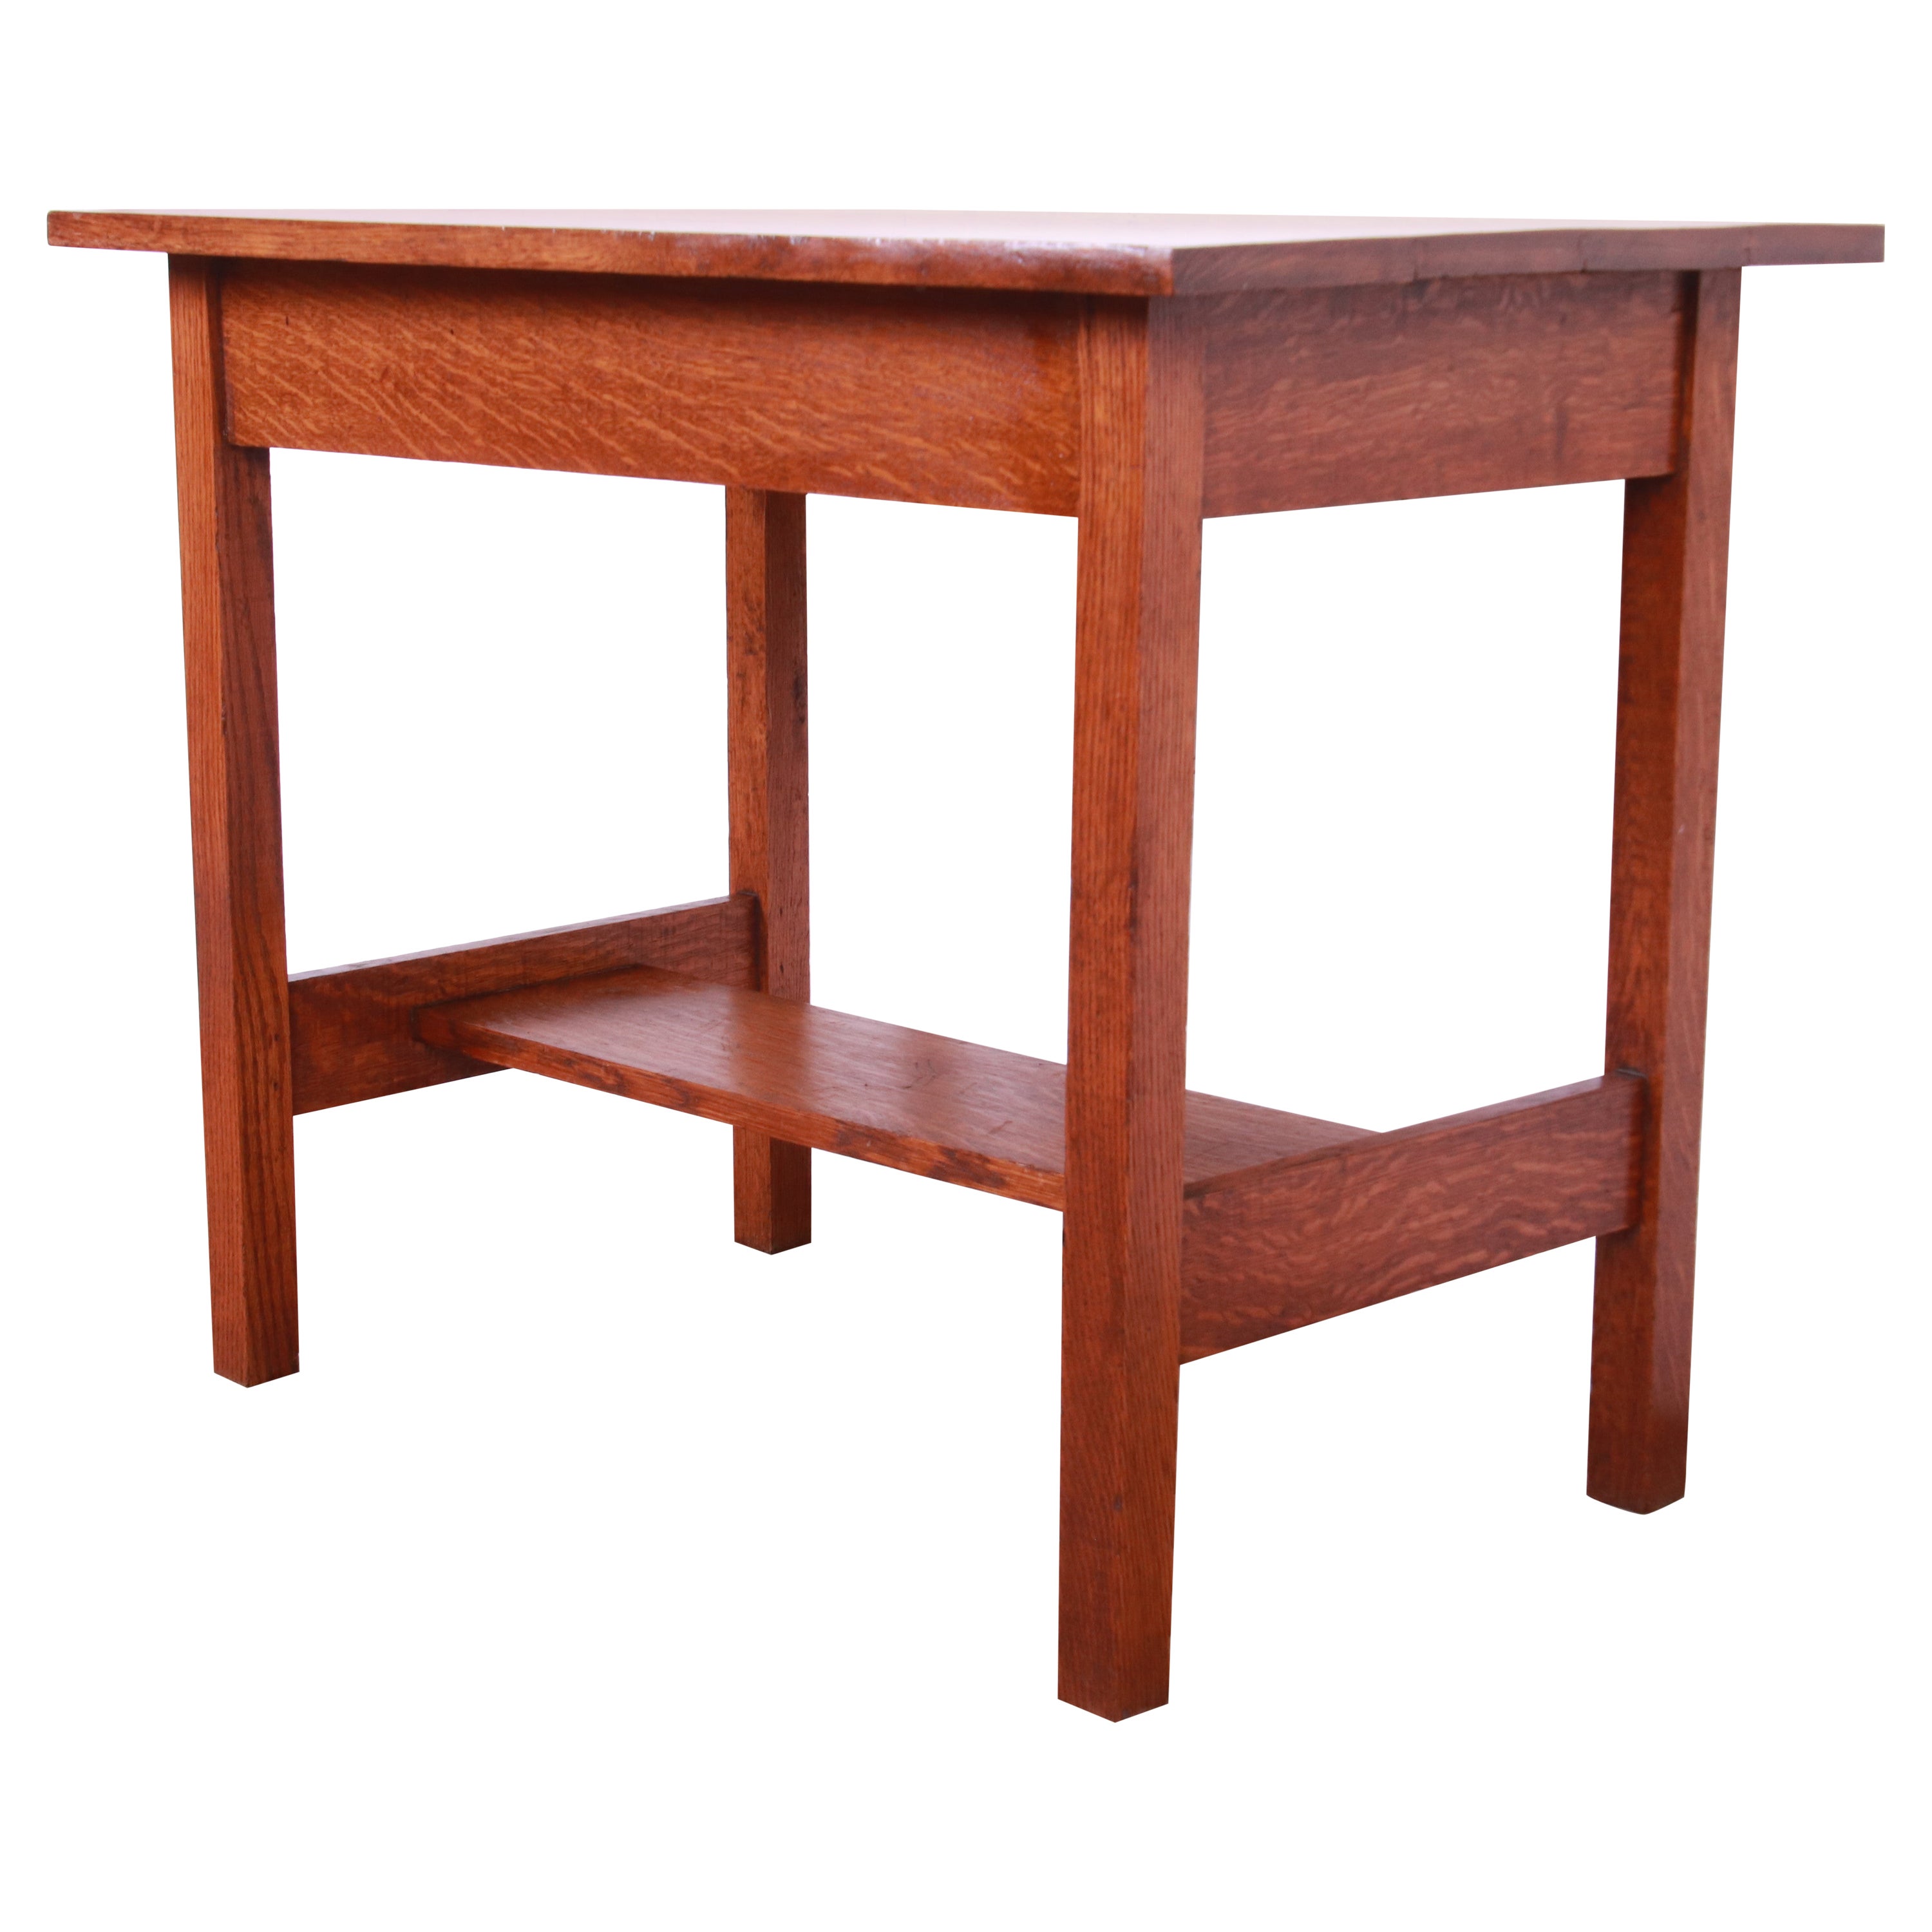 Antique Mission Oak Arts & Crafts Library Table or Writing Desk, Circa 1900